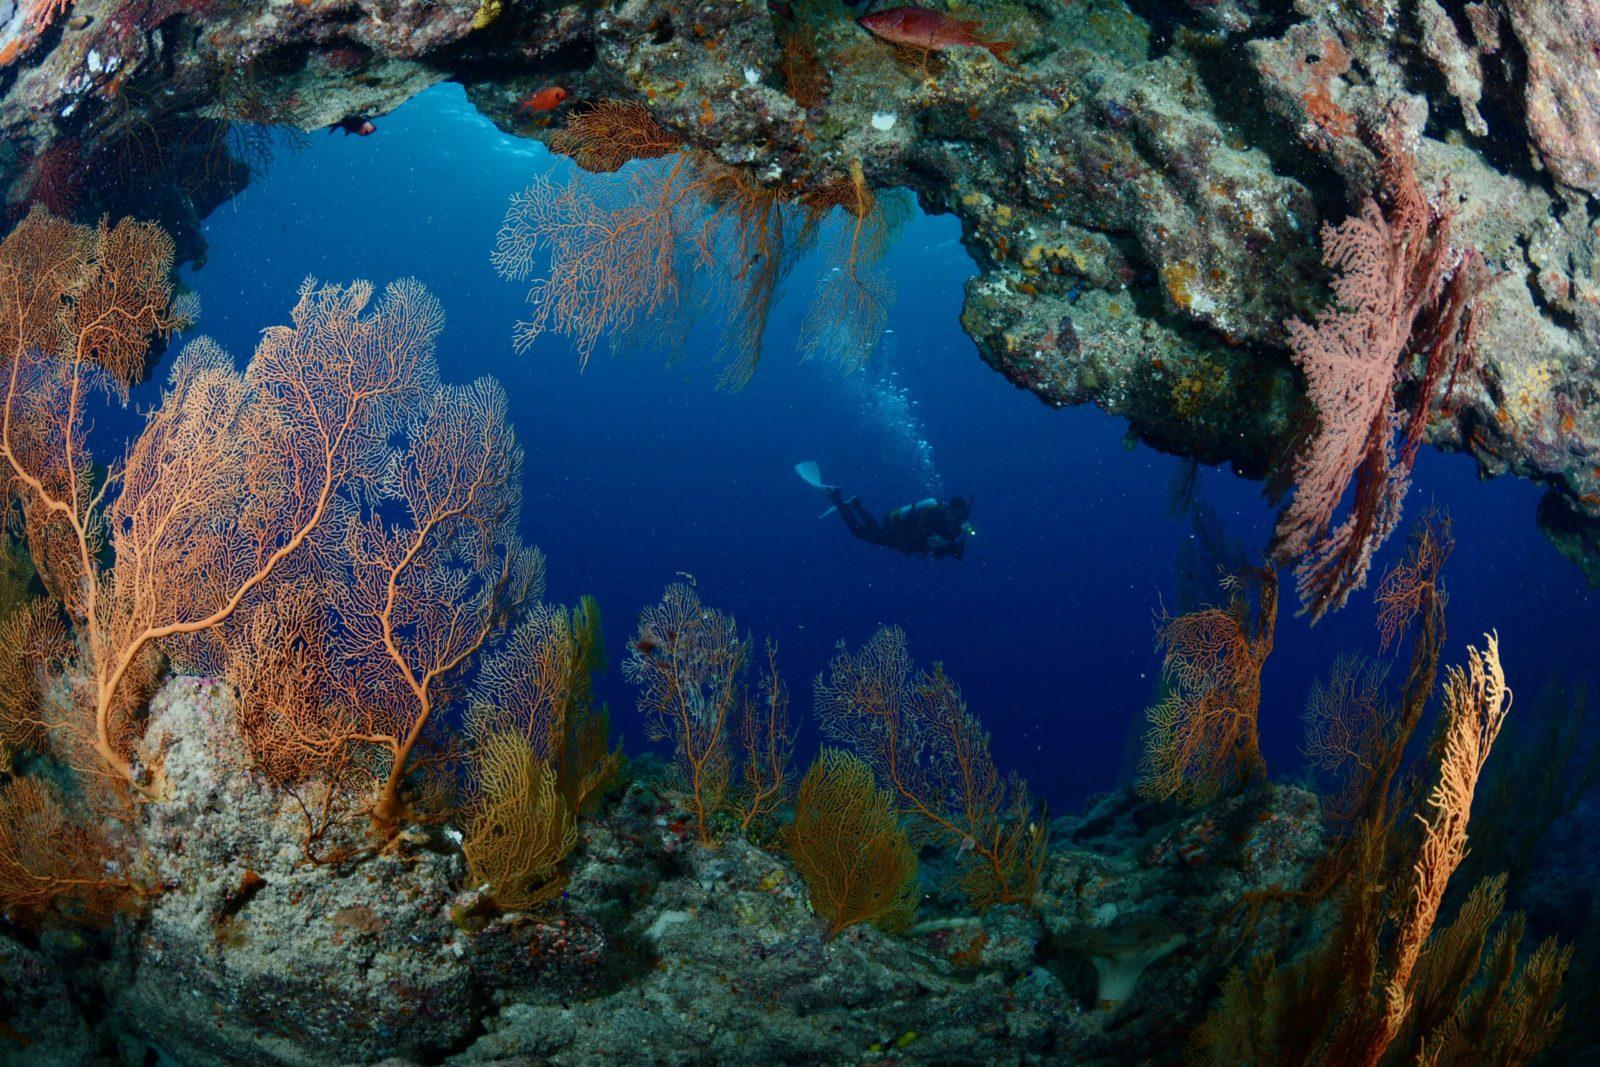 A Guide to Some of Australia's Best Dive Sites